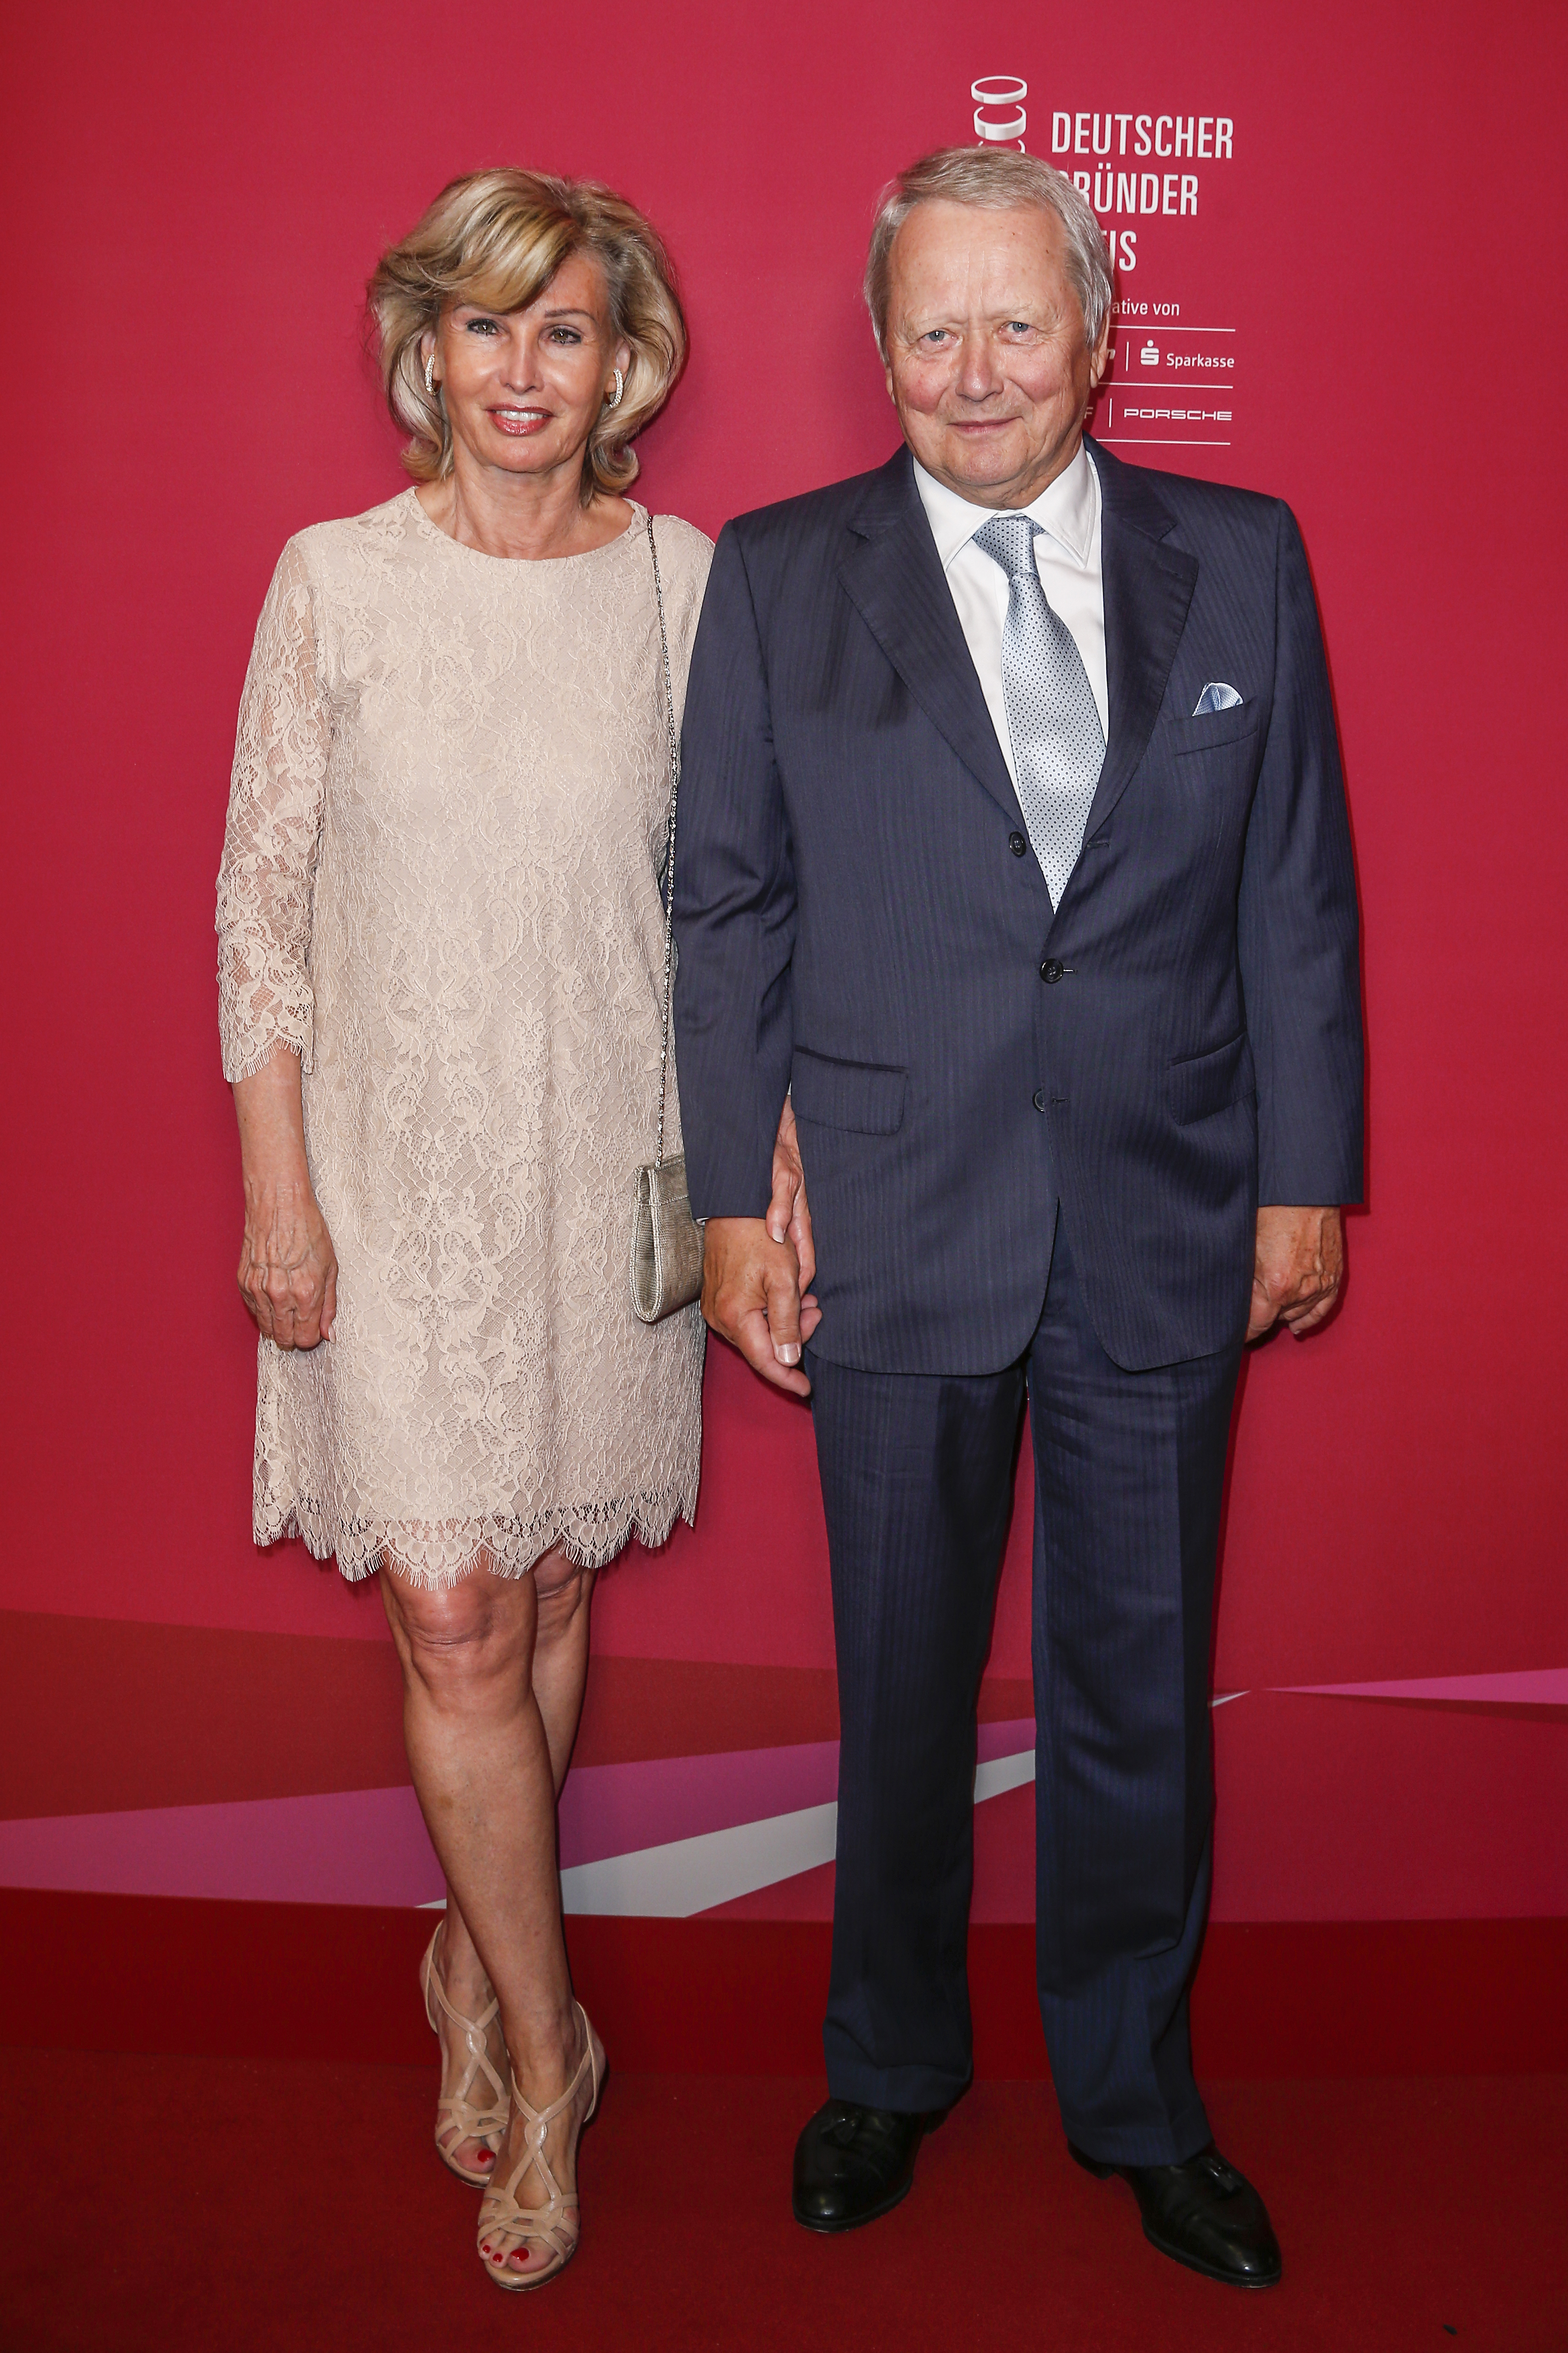 Claudia and Wolfgang Porsche on June 23, 2015 in Wetzlar, Germany. | Source: Getty Images